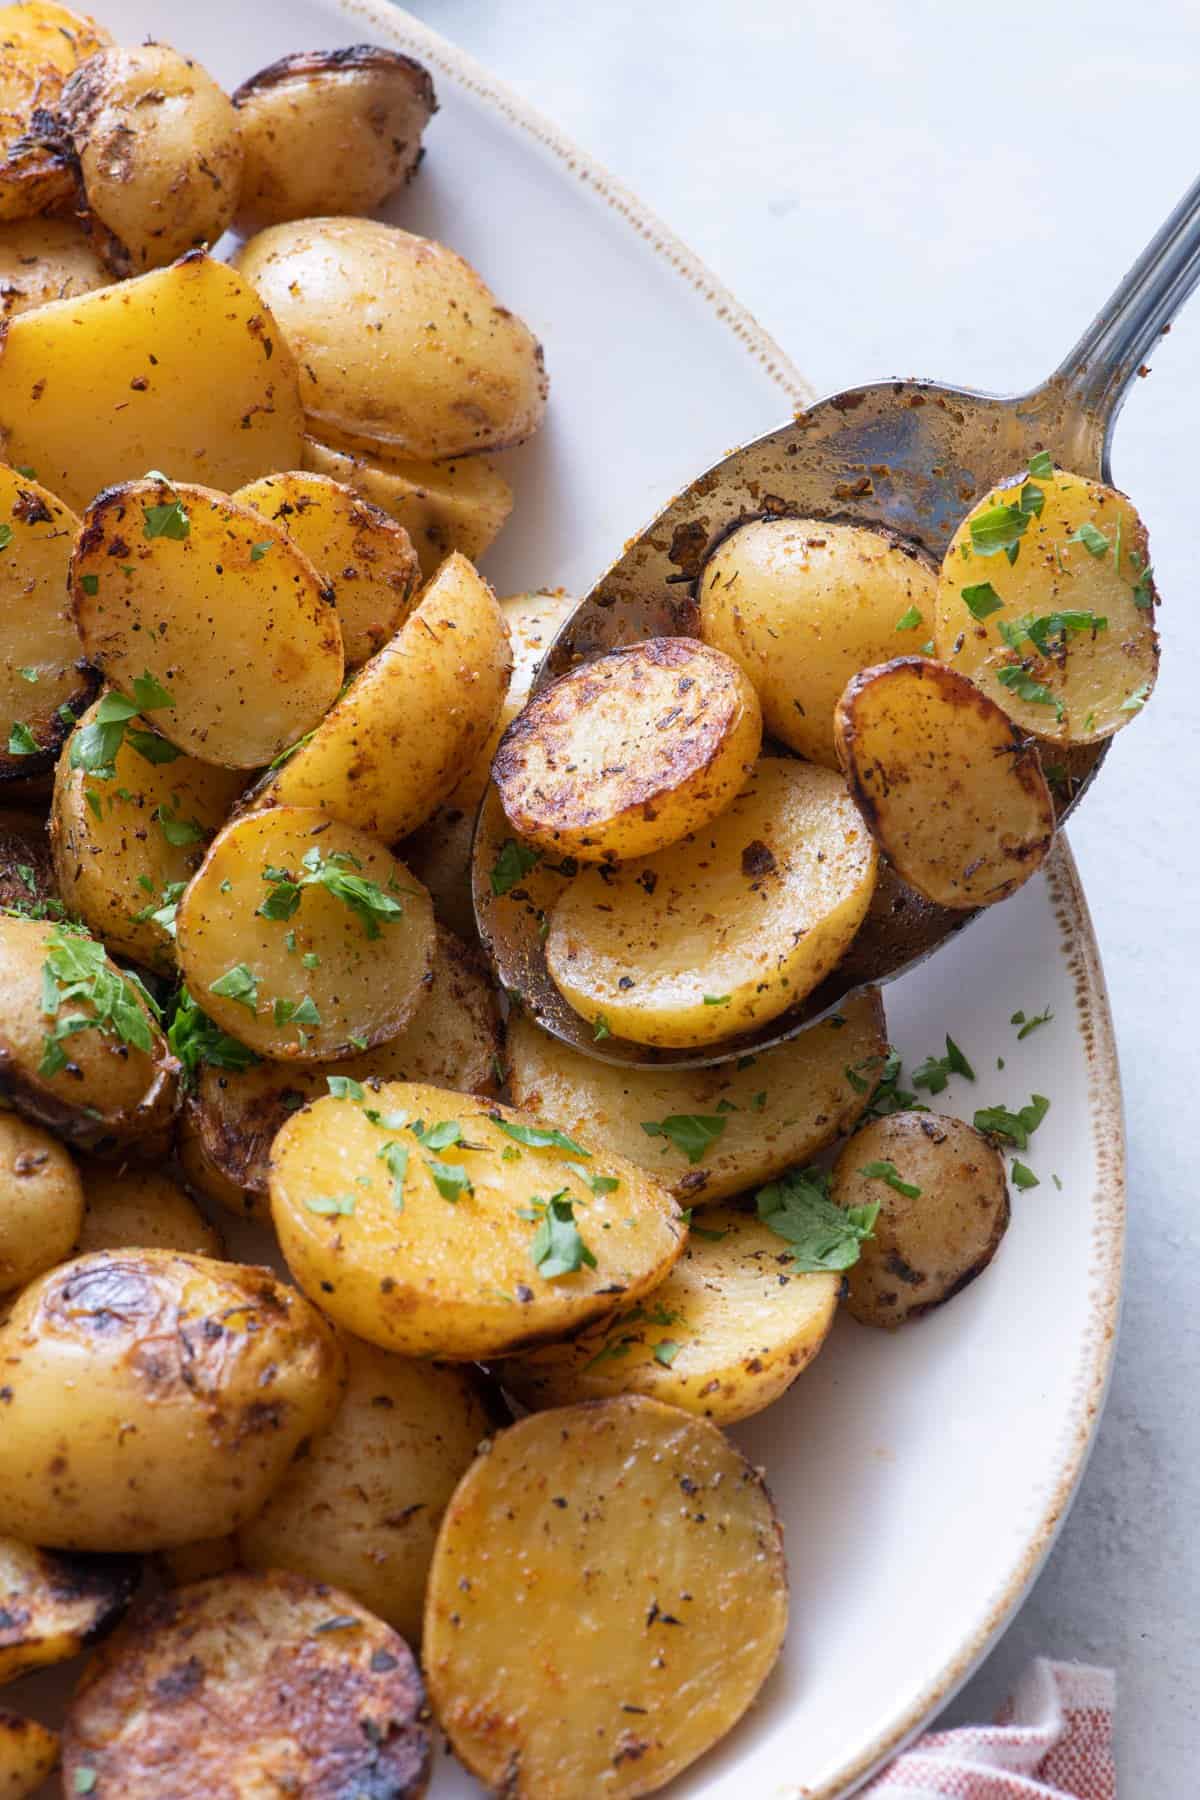 Spoon grabbing seasoned grilled potatoes garnished with parsley from serving dish.